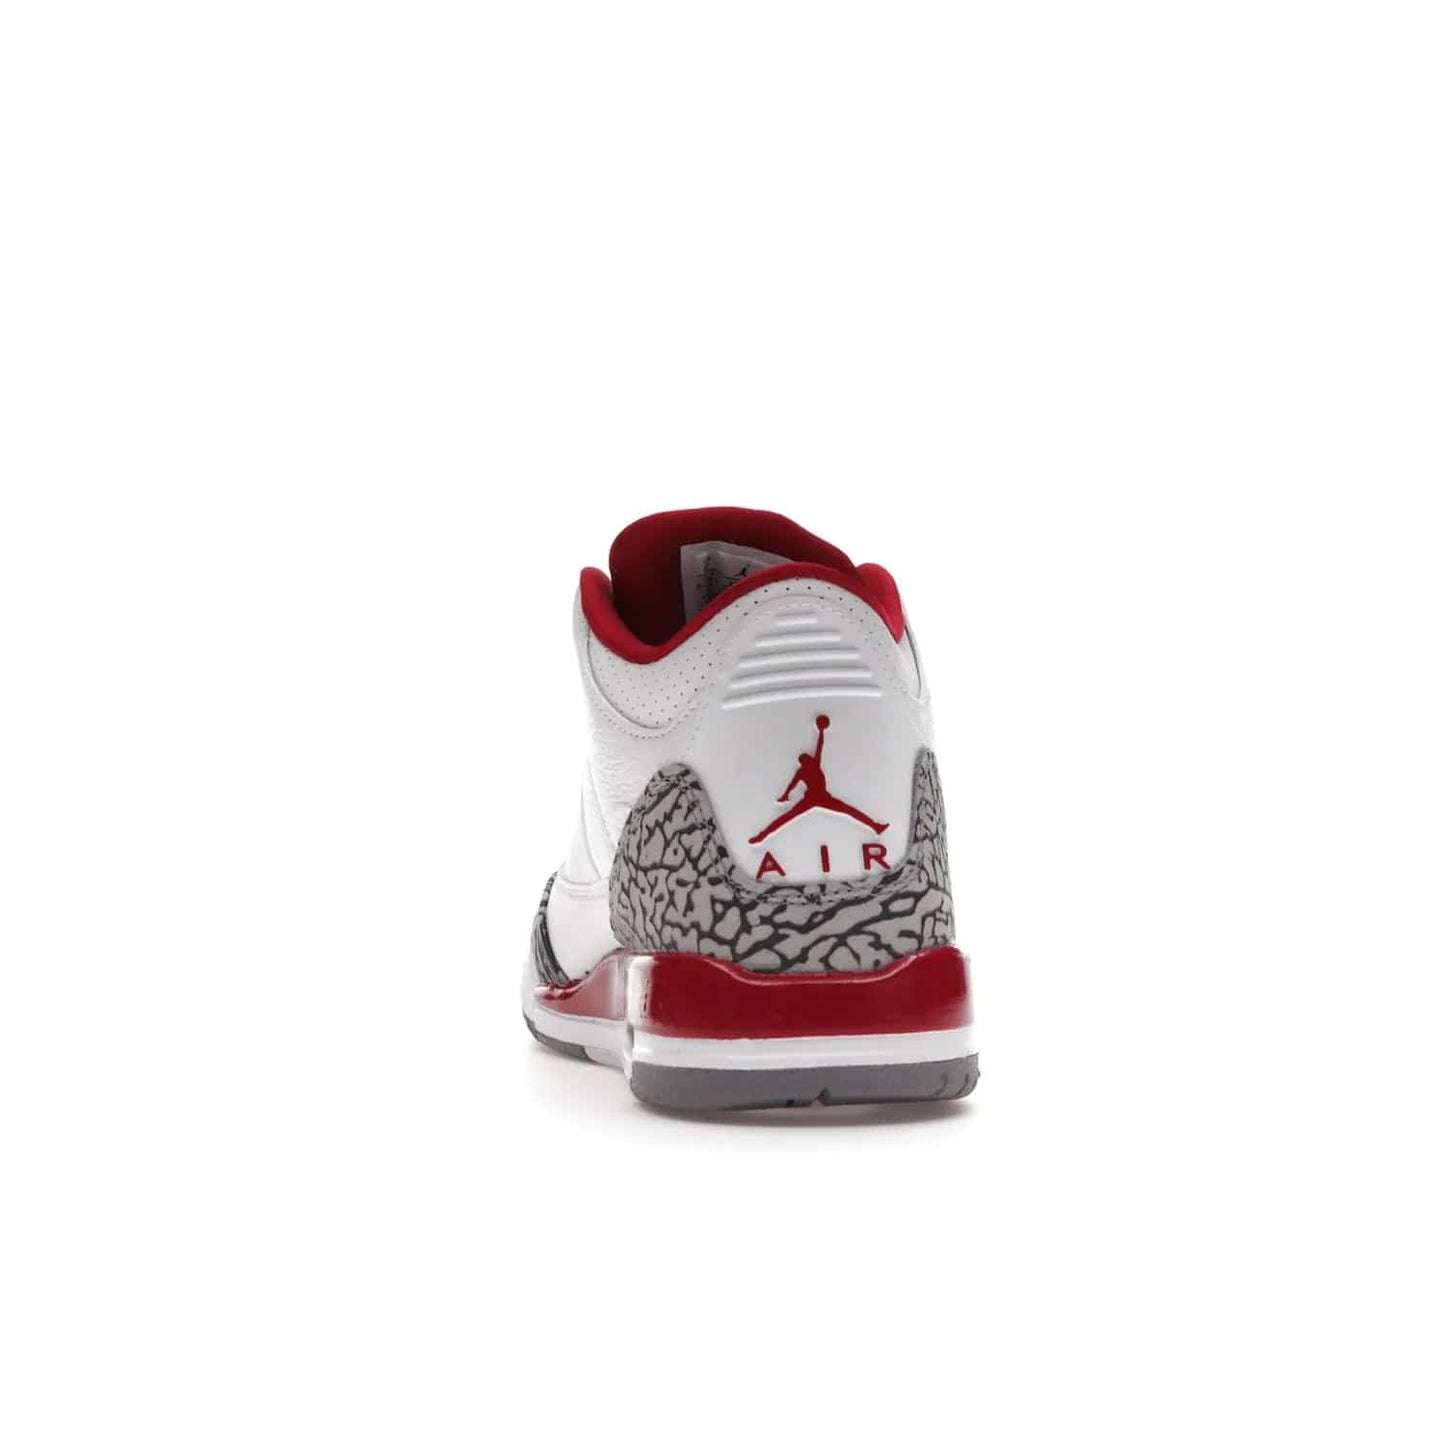 Jordan 3 Retro Cardinal (GS) - Image 27 - Only at www.BallersClubKickz.com - Shop the kid-sized Air Jordan 3 Retro Cardinal GS, released Feb 2022. White tumbled leather upper, light curry accenting, cement grey and classic red details throughout. Visible Air cushioning, midsole, and an eye-catching outsole. Show off your style with this fashionable streetwear silhouette.